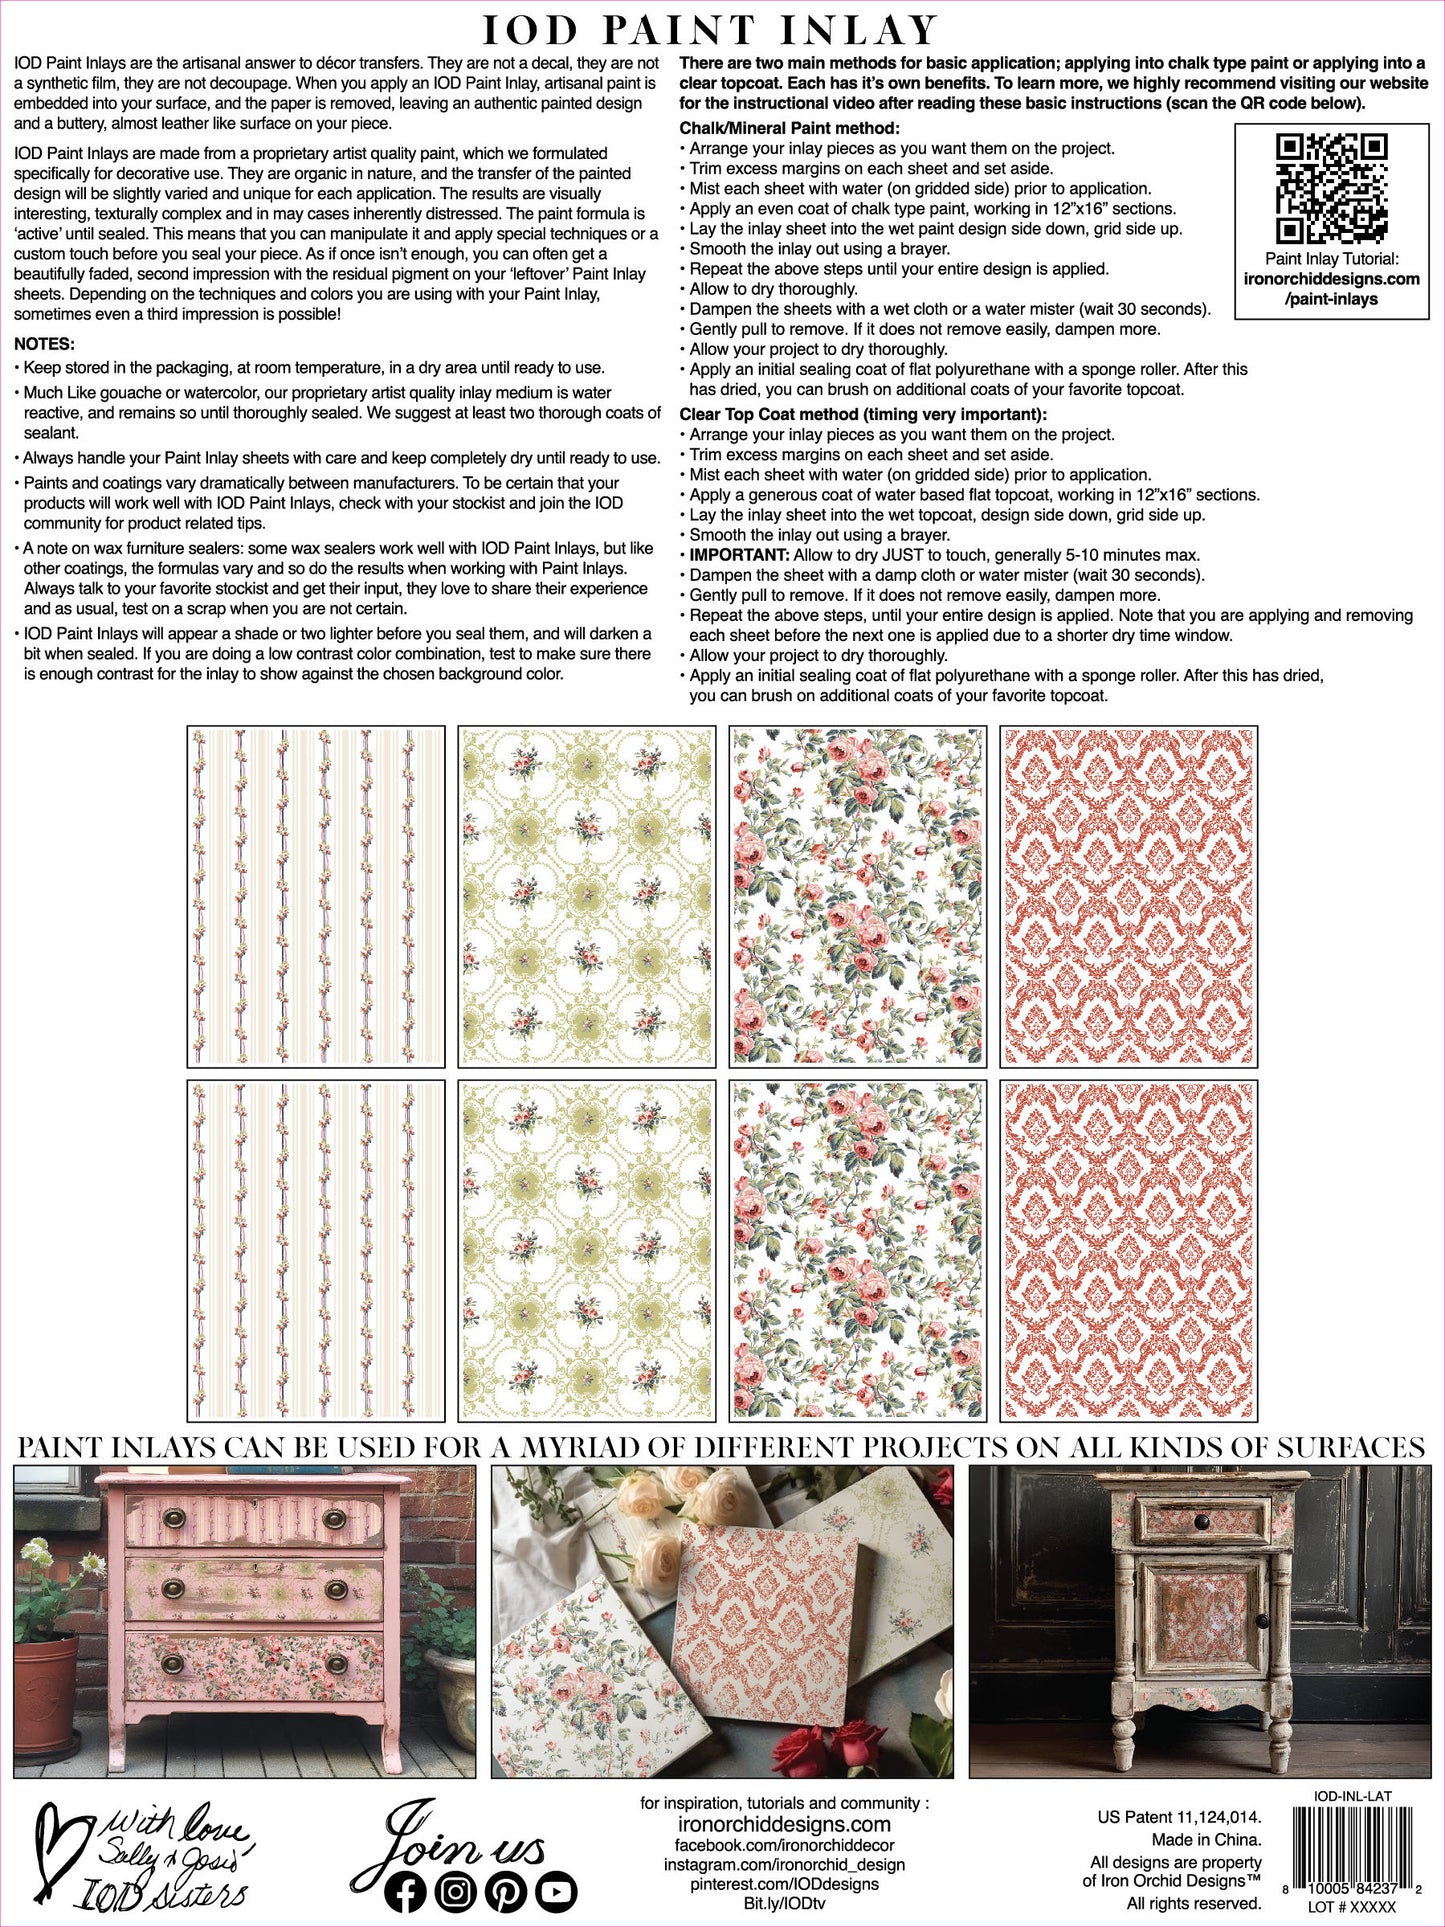 IOD Lattice Rose Paint Inlay - BEST SELLER - shipping to you March 20th